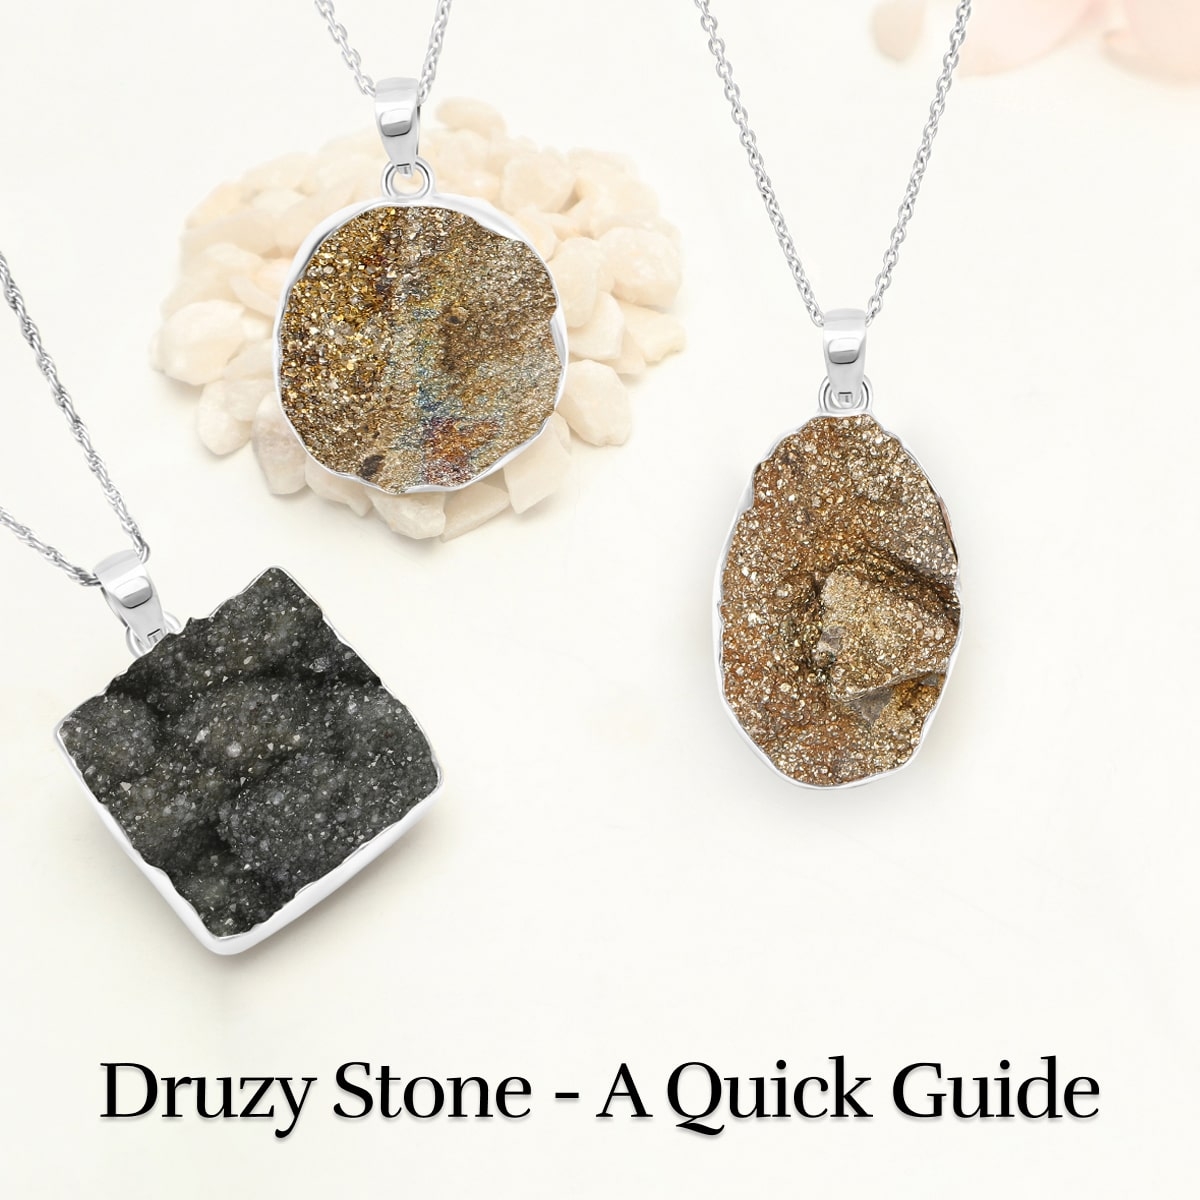 What Is A Druzy Stone